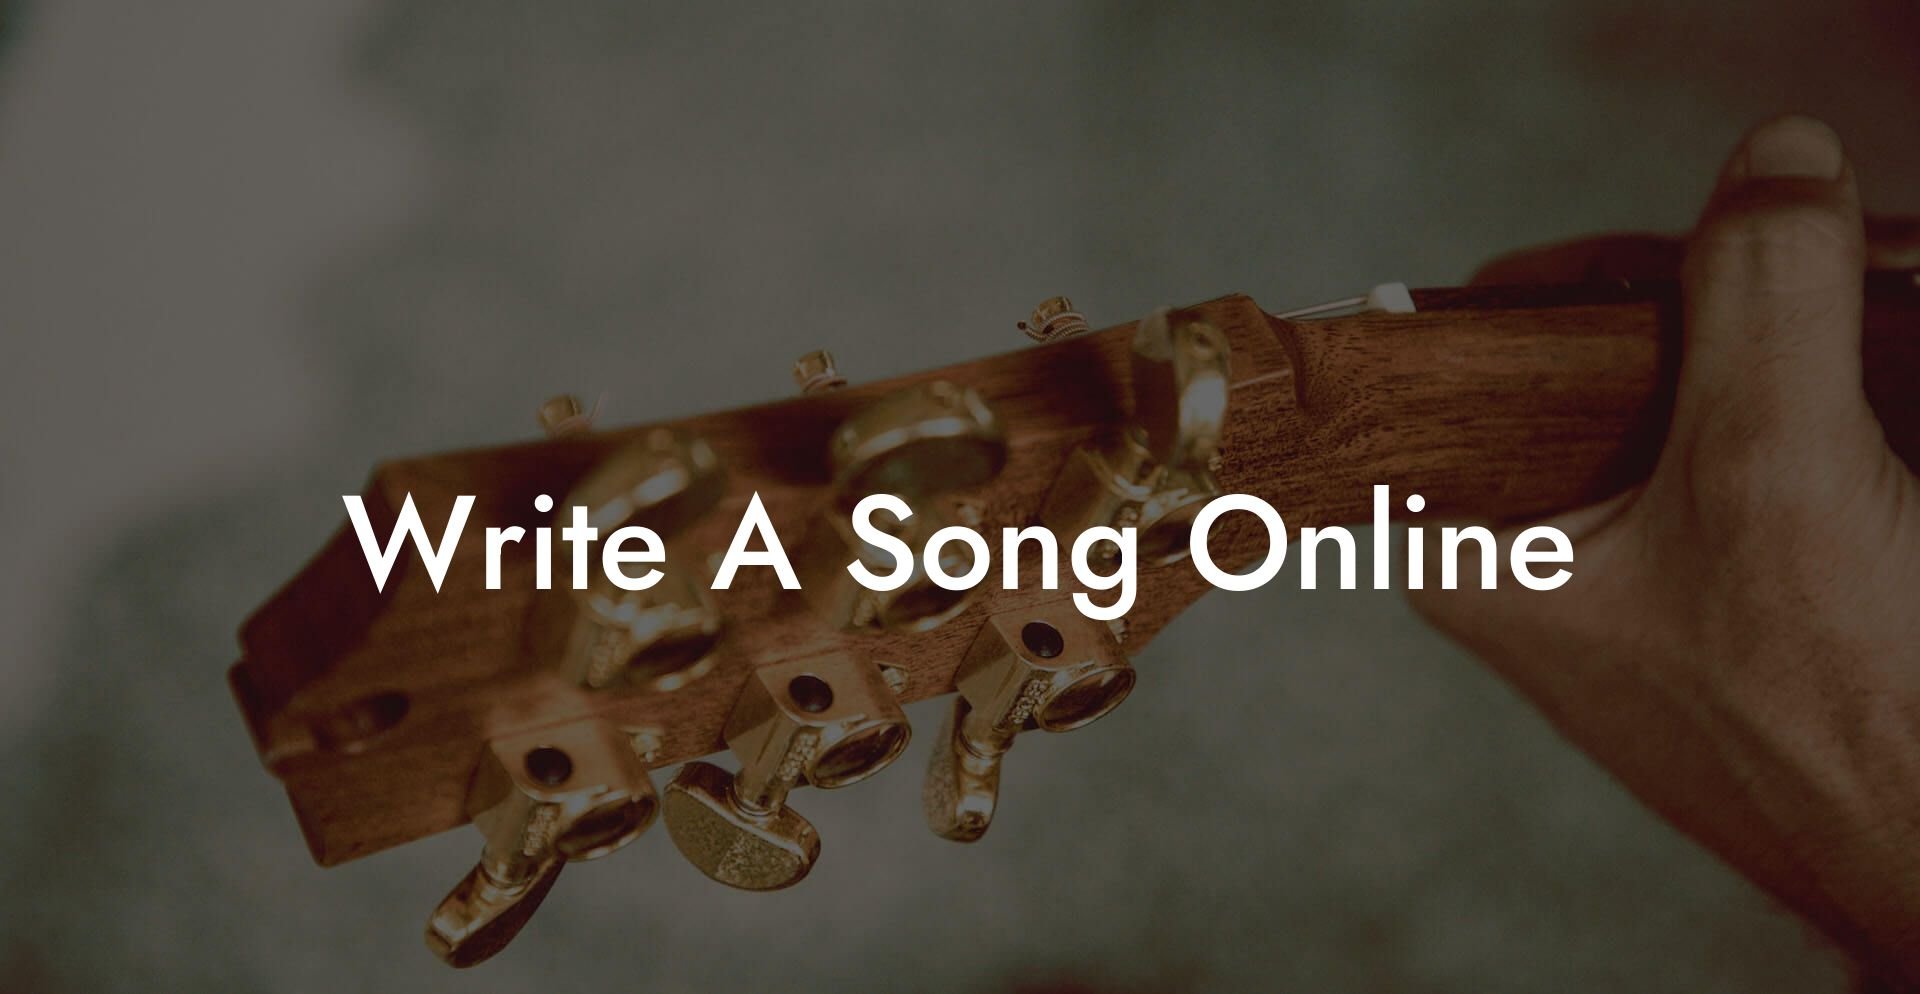 write a song online lyric assistant